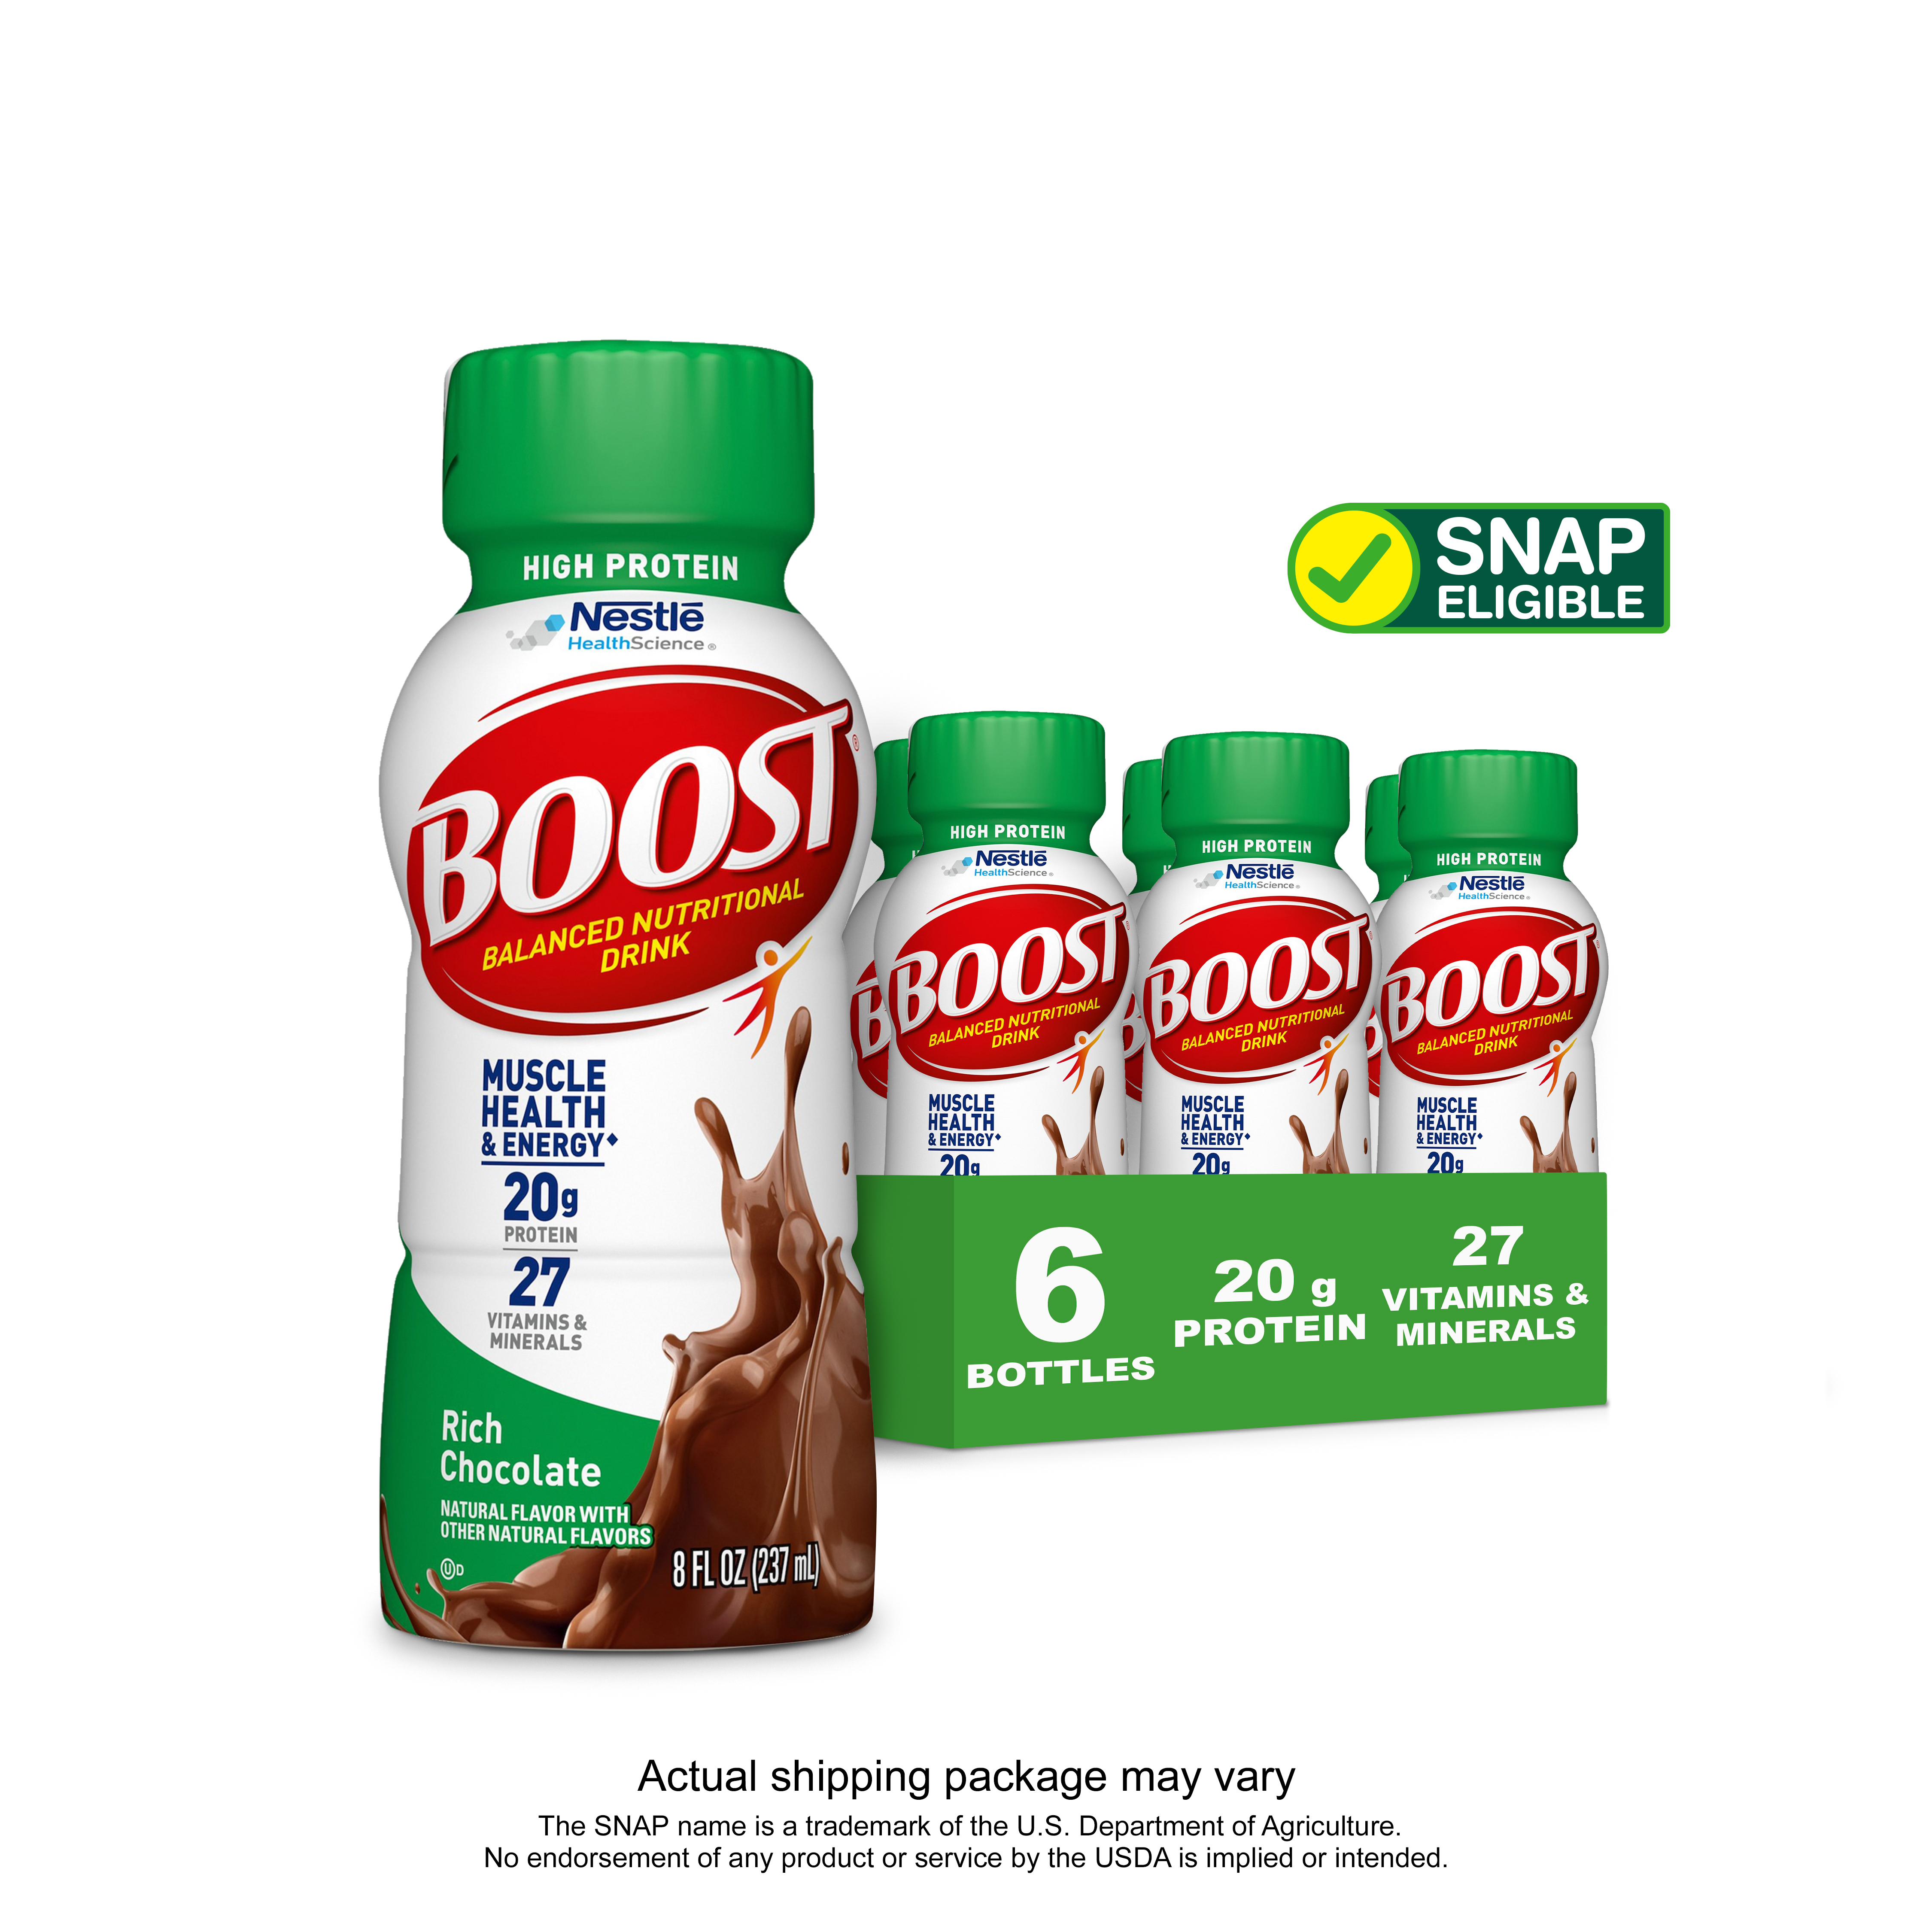 BOOST High Protein Nutritional Drink, Rich Chocolate, 20 g Protein , 6 - 8 fl oz Bottles - image 1 of 11